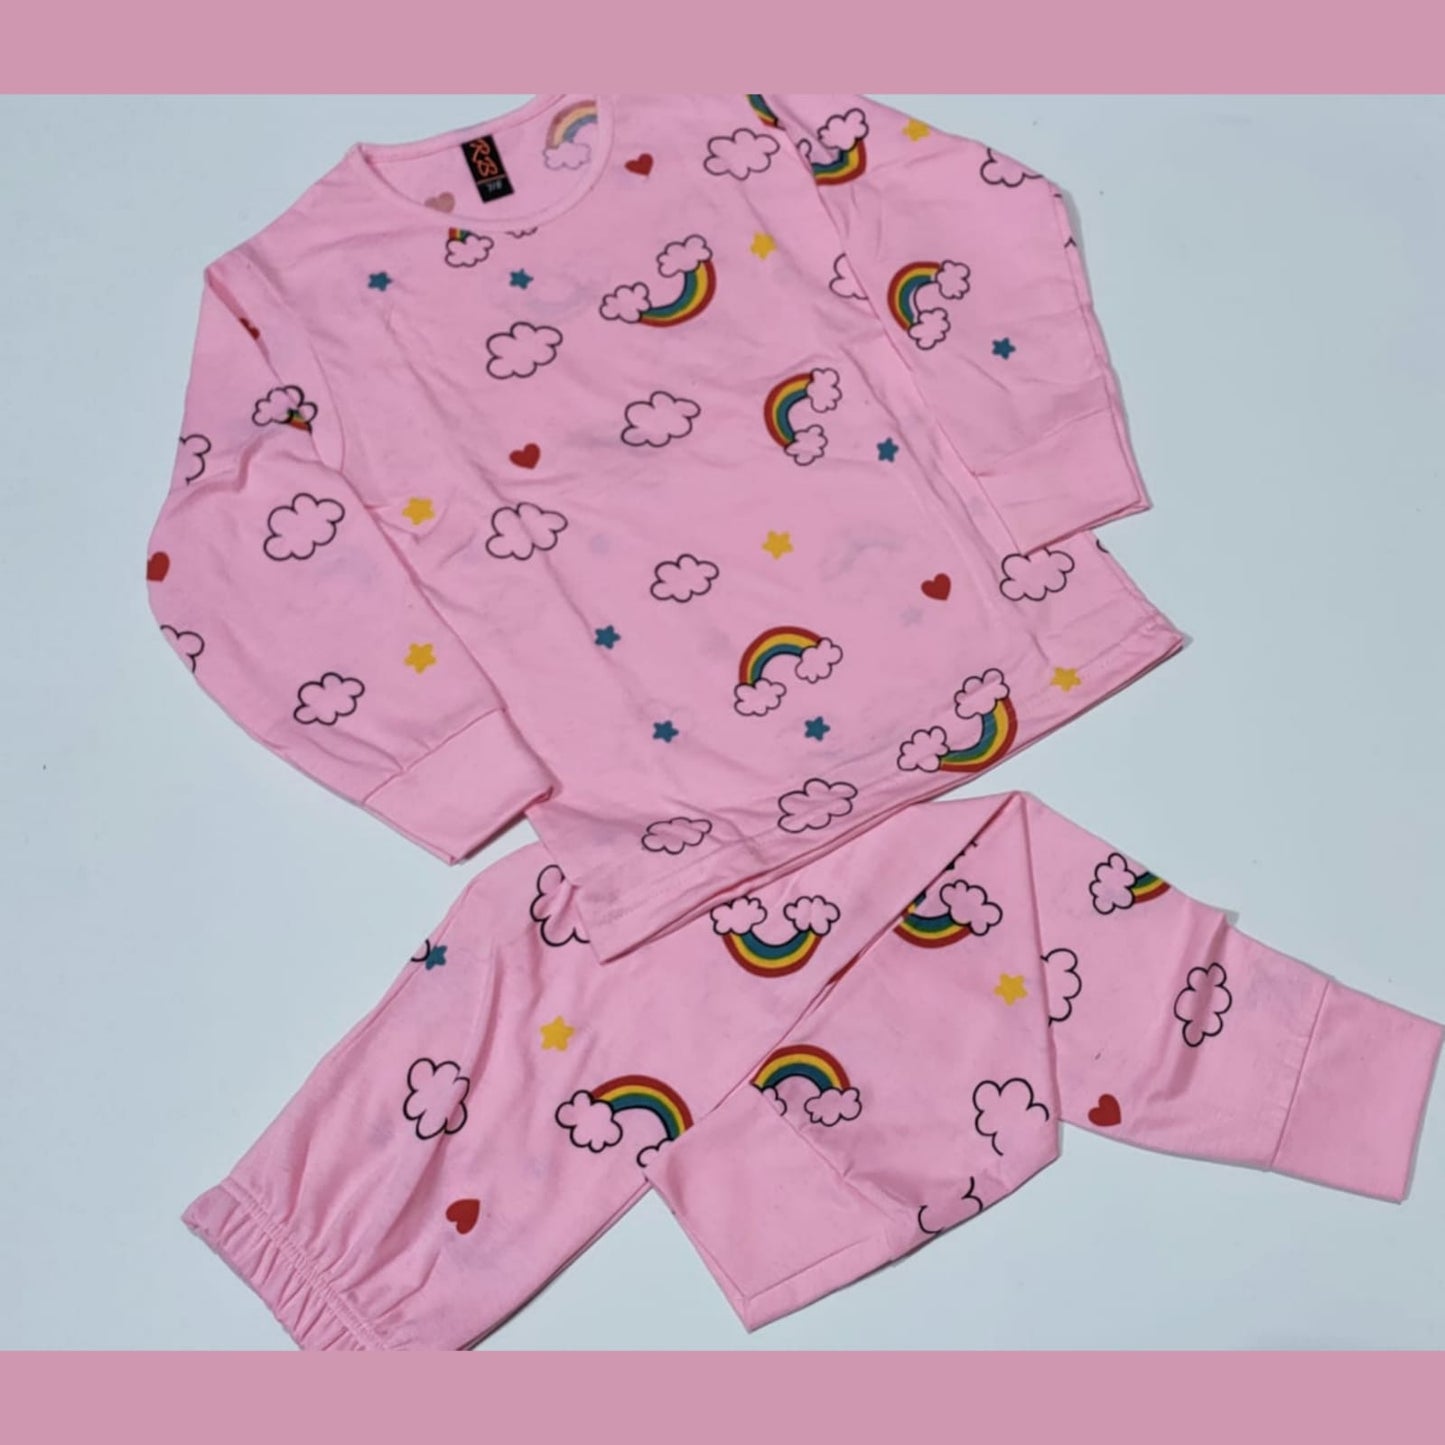 Baby or Baba Pink Rainbow Print Full Sleeves Night Suit for Kids (1 Pcs) (RX-128)